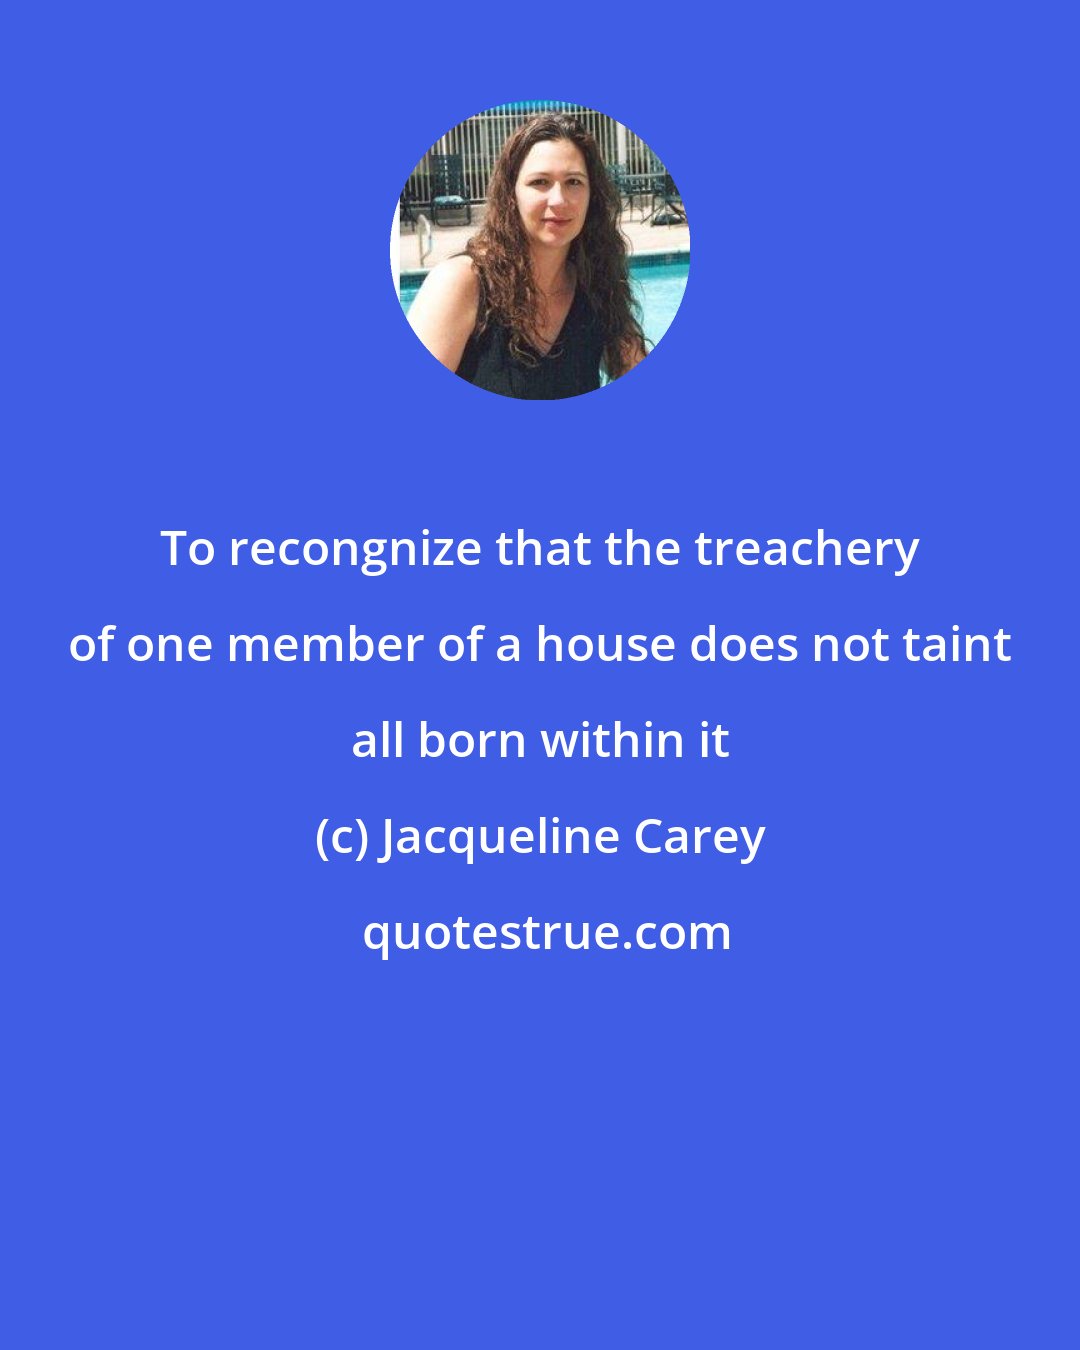 Jacqueline Carey: To recongnize that the treachery of one member of a house does not taint all born within it